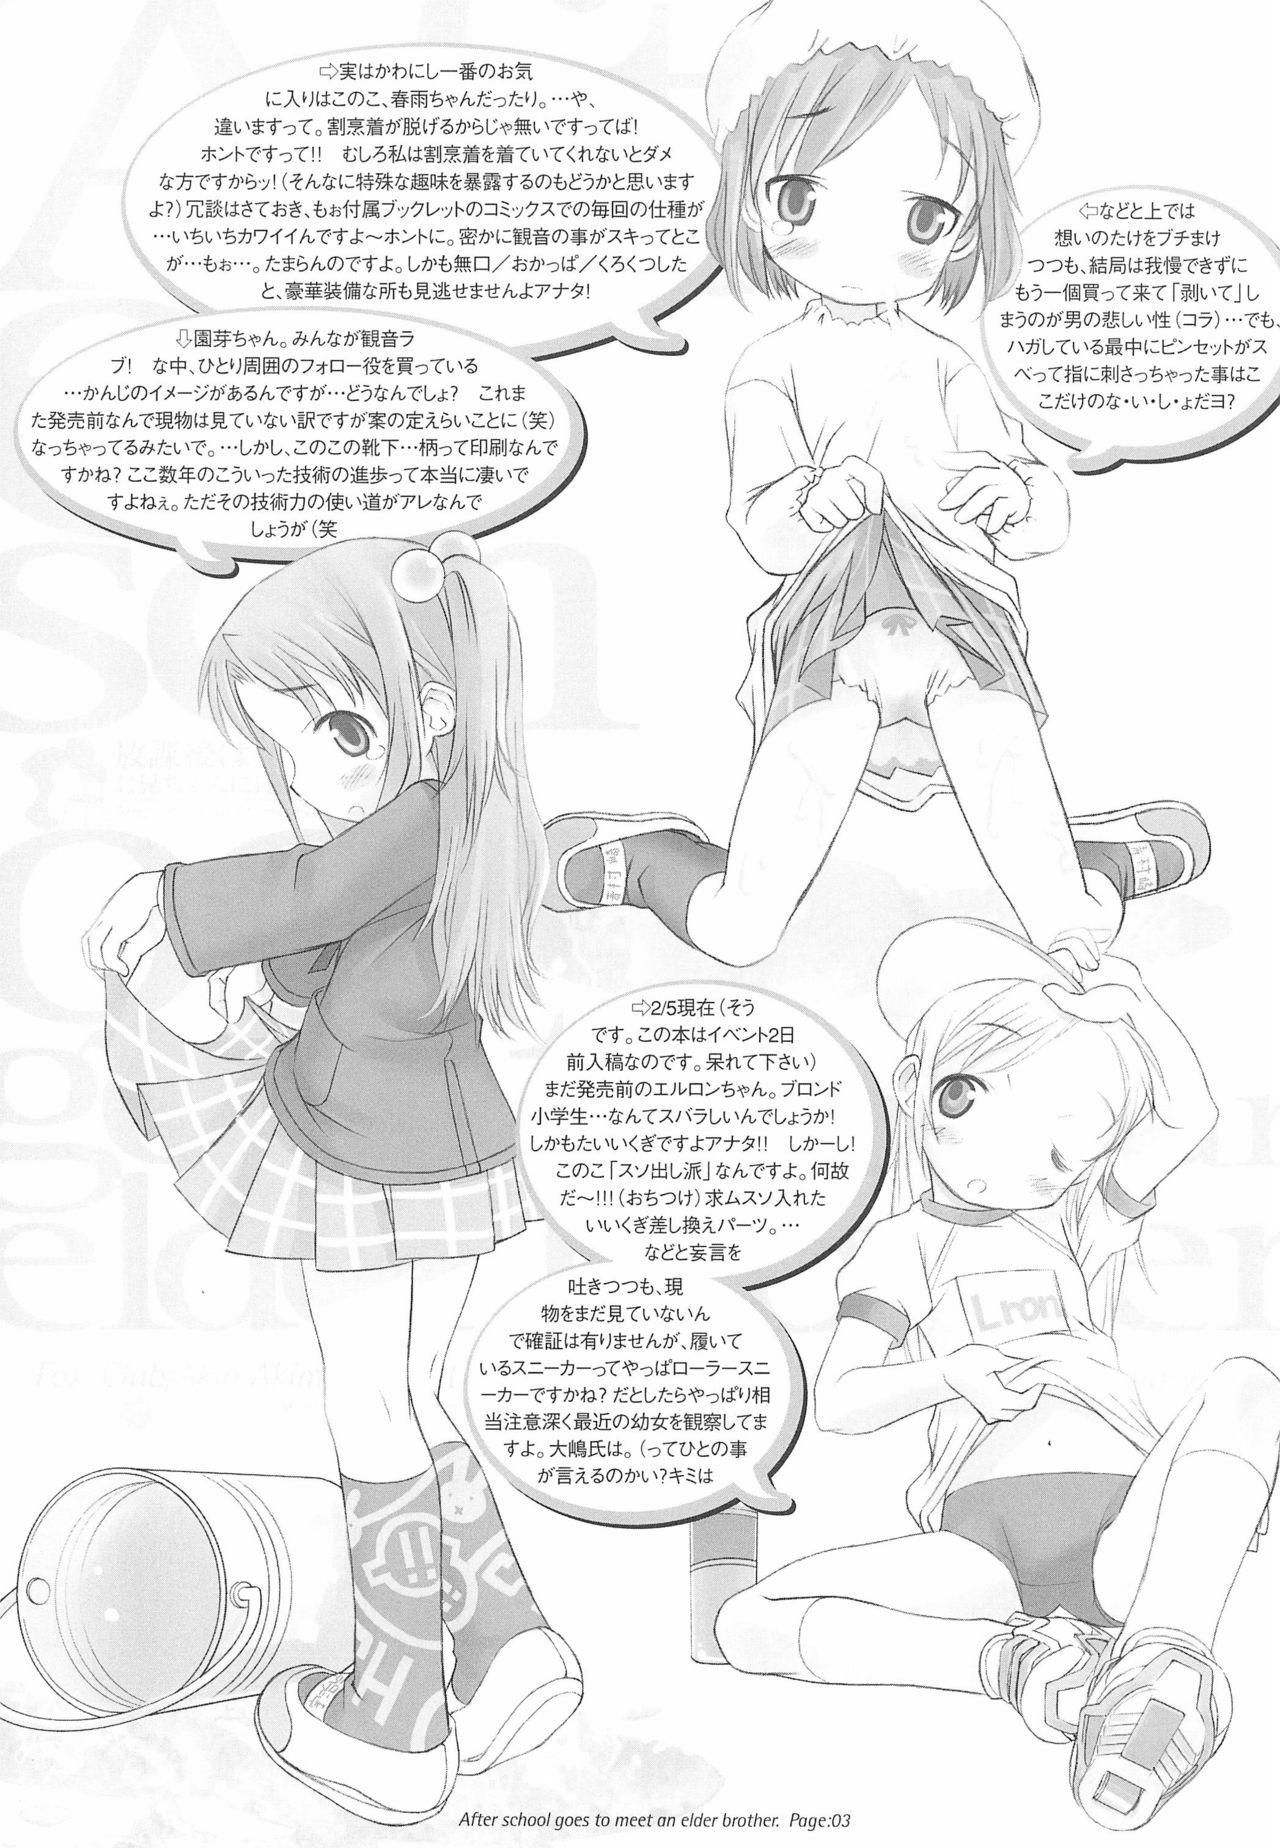 Defloration After School Goes To Meet An Elder Brother - Shuukan watashi no onii chan | weekly dearest my brother Prostituta - Page 3